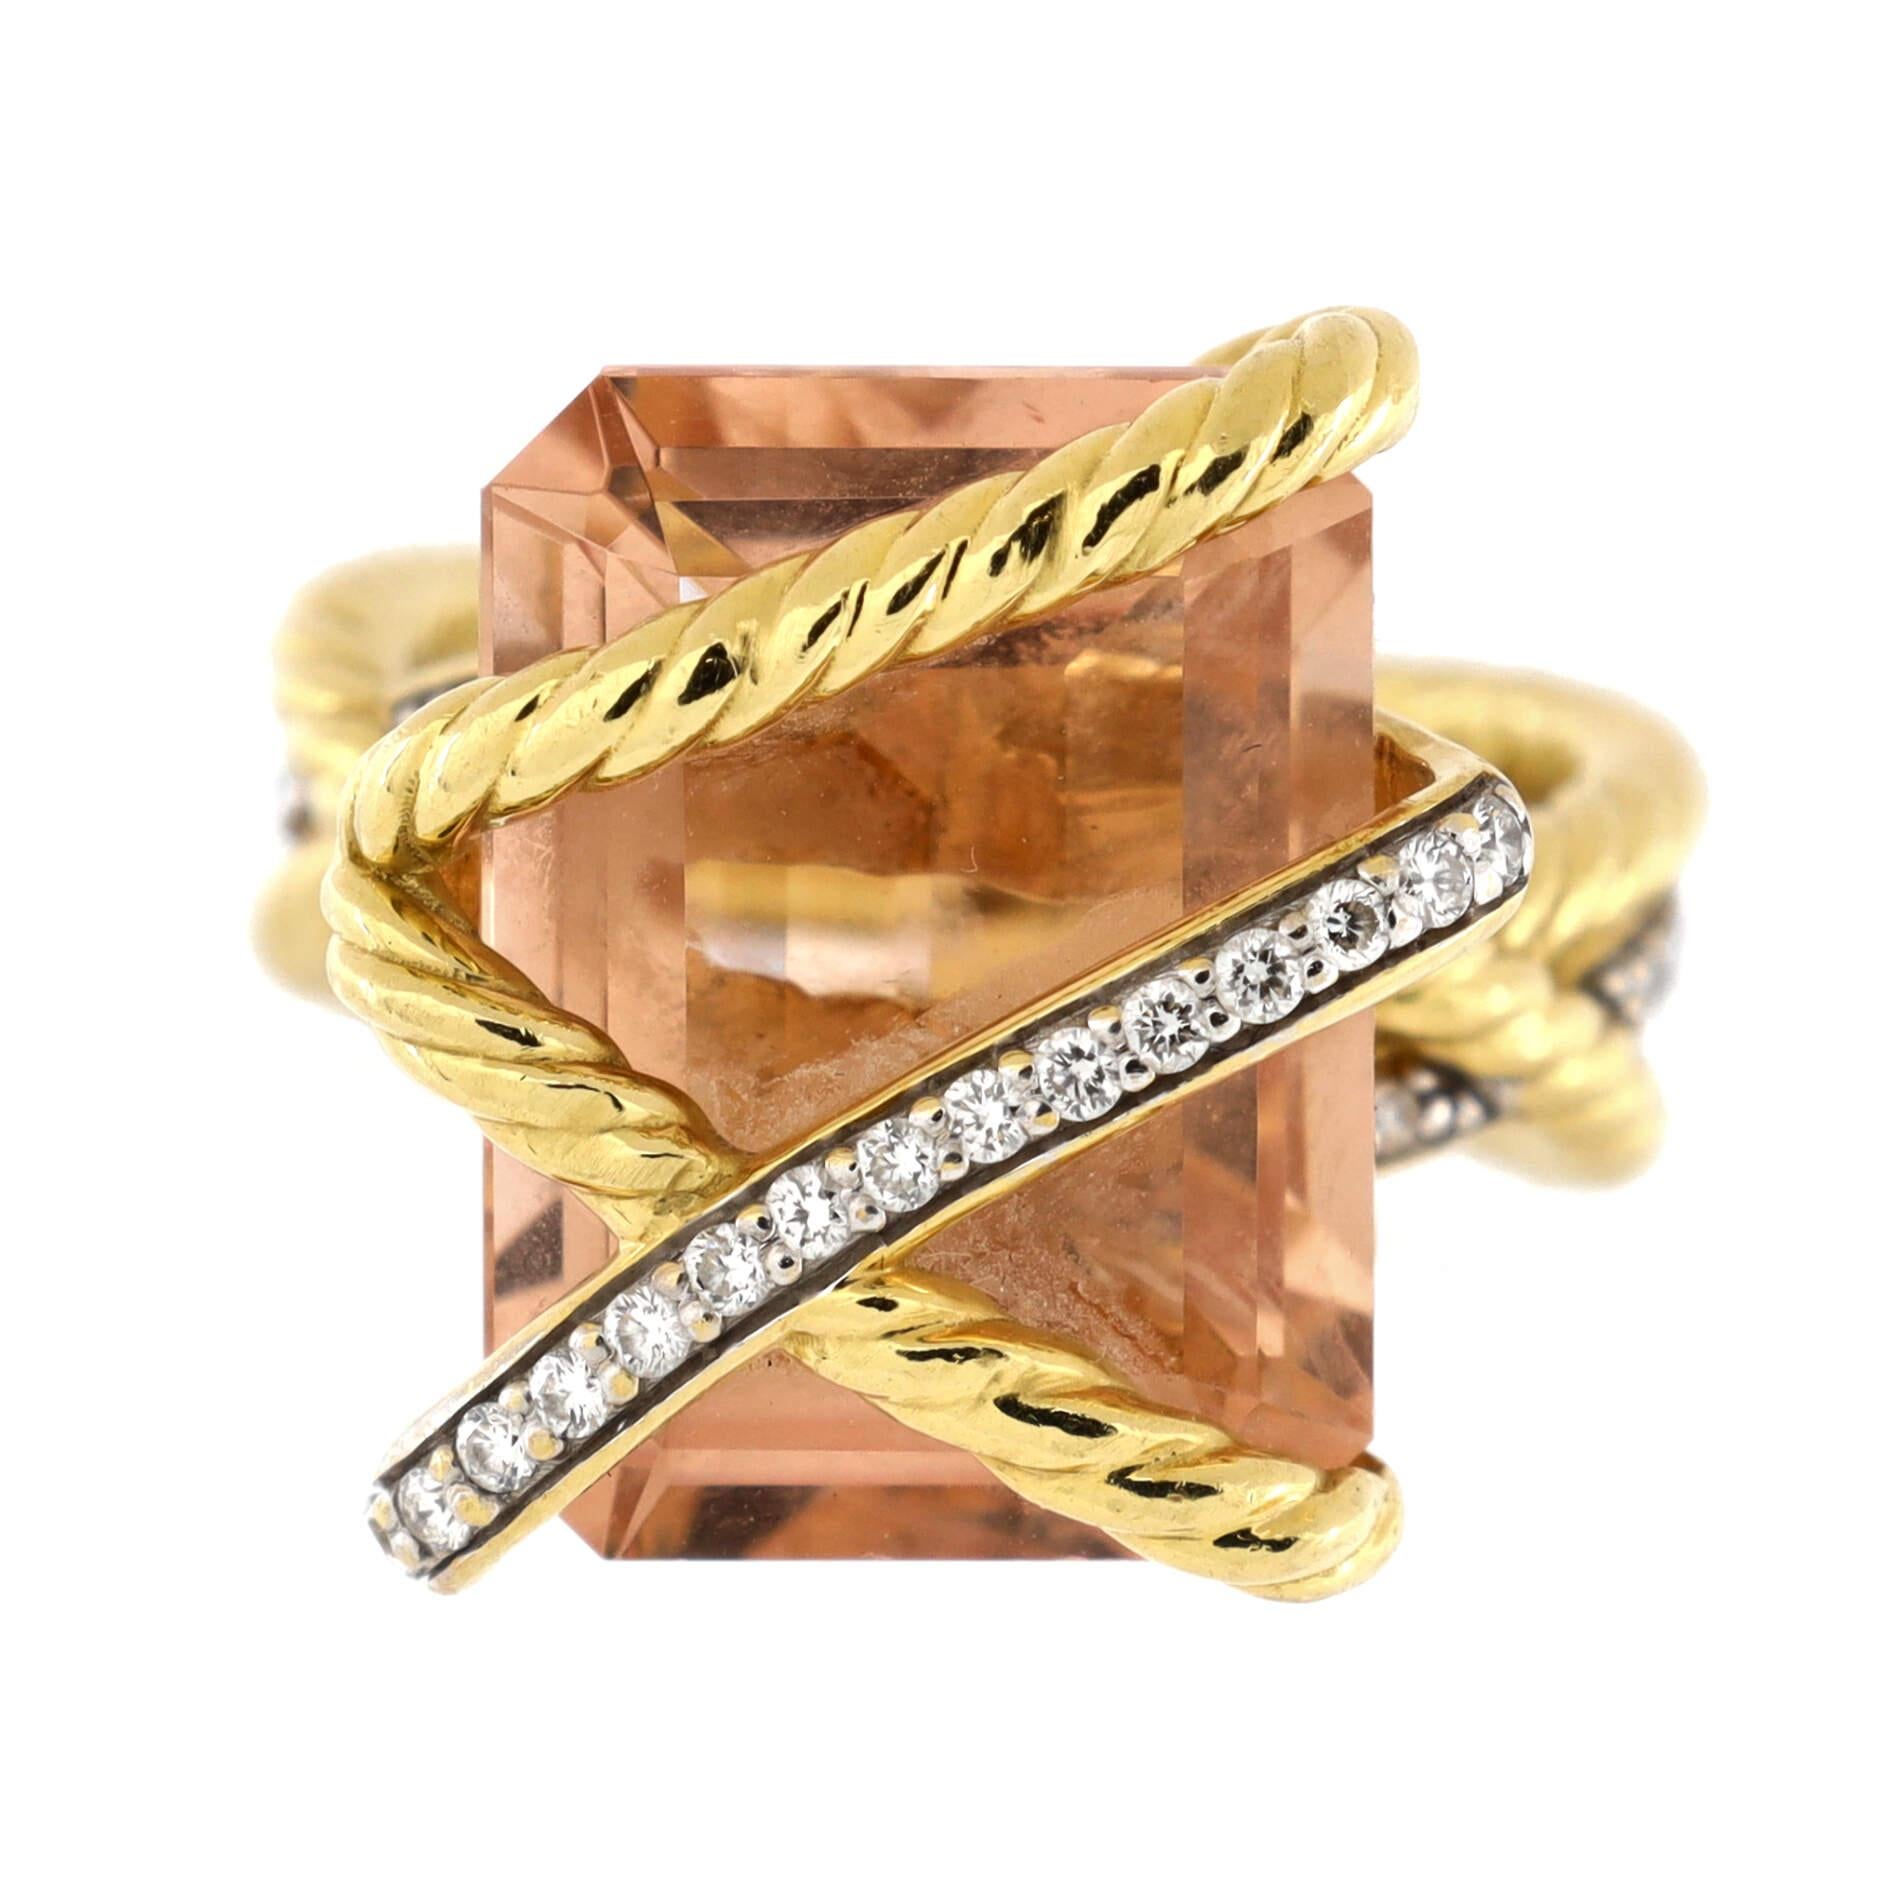 Condition: Very good. Moderate wear throughout.
Accessories: No Accessories
Measurements: Size: 5.25 - 50, Width: 6.80 mm
Designer: David Yurman
Model: Cable Wrap Ring 18K Yellow Gold with Morganite and Diamonds
Exterior Color: Yellow Gold
Item